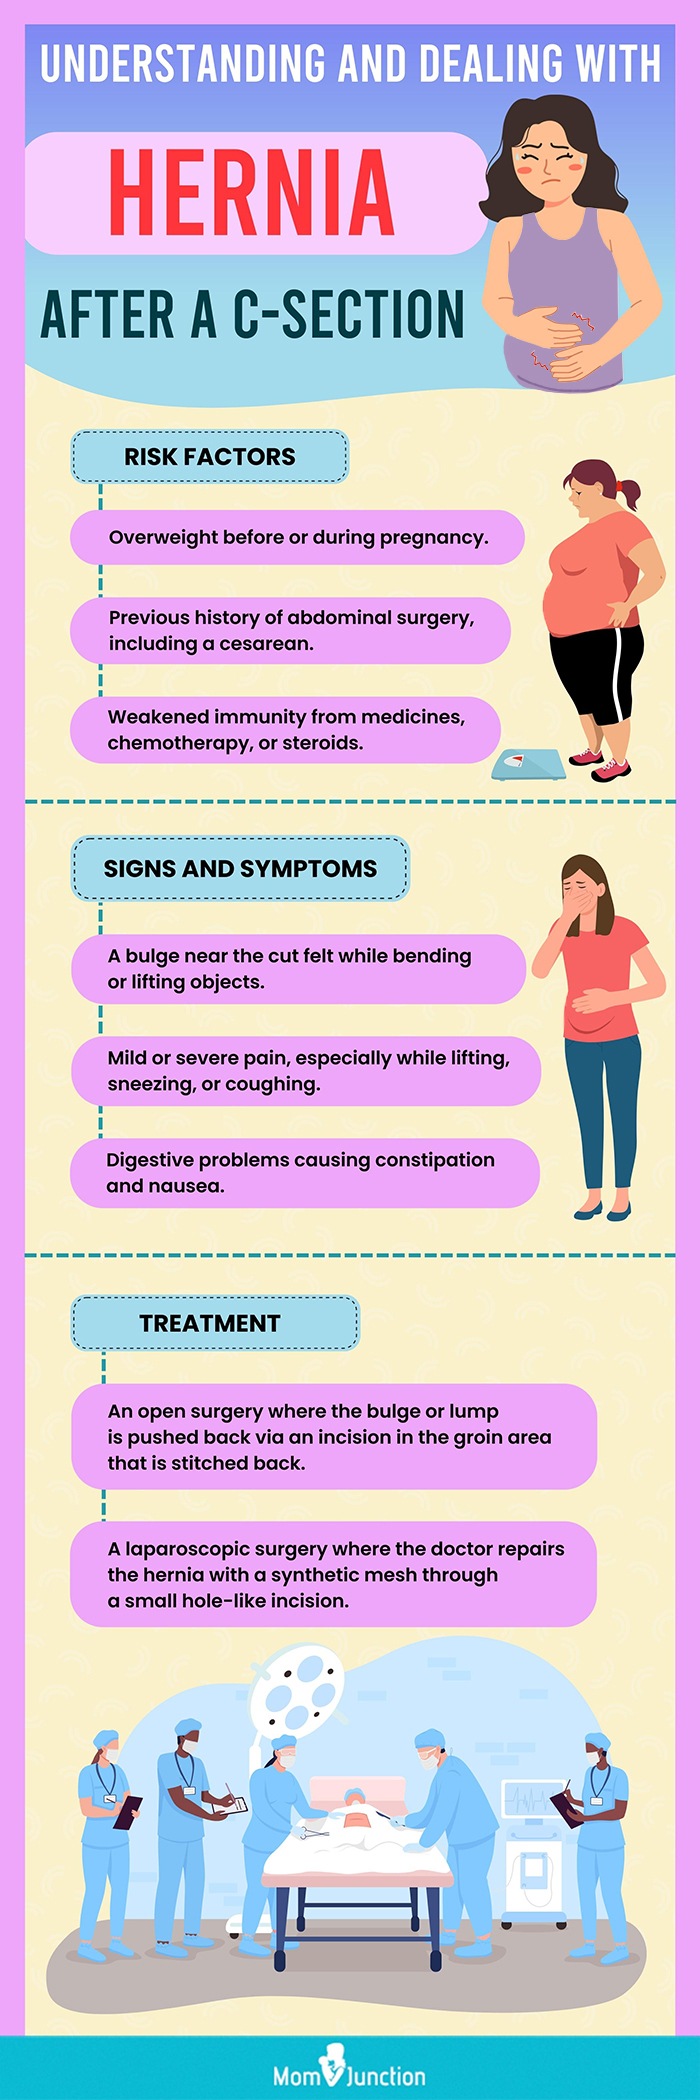 hernia after a c-section [infographic]